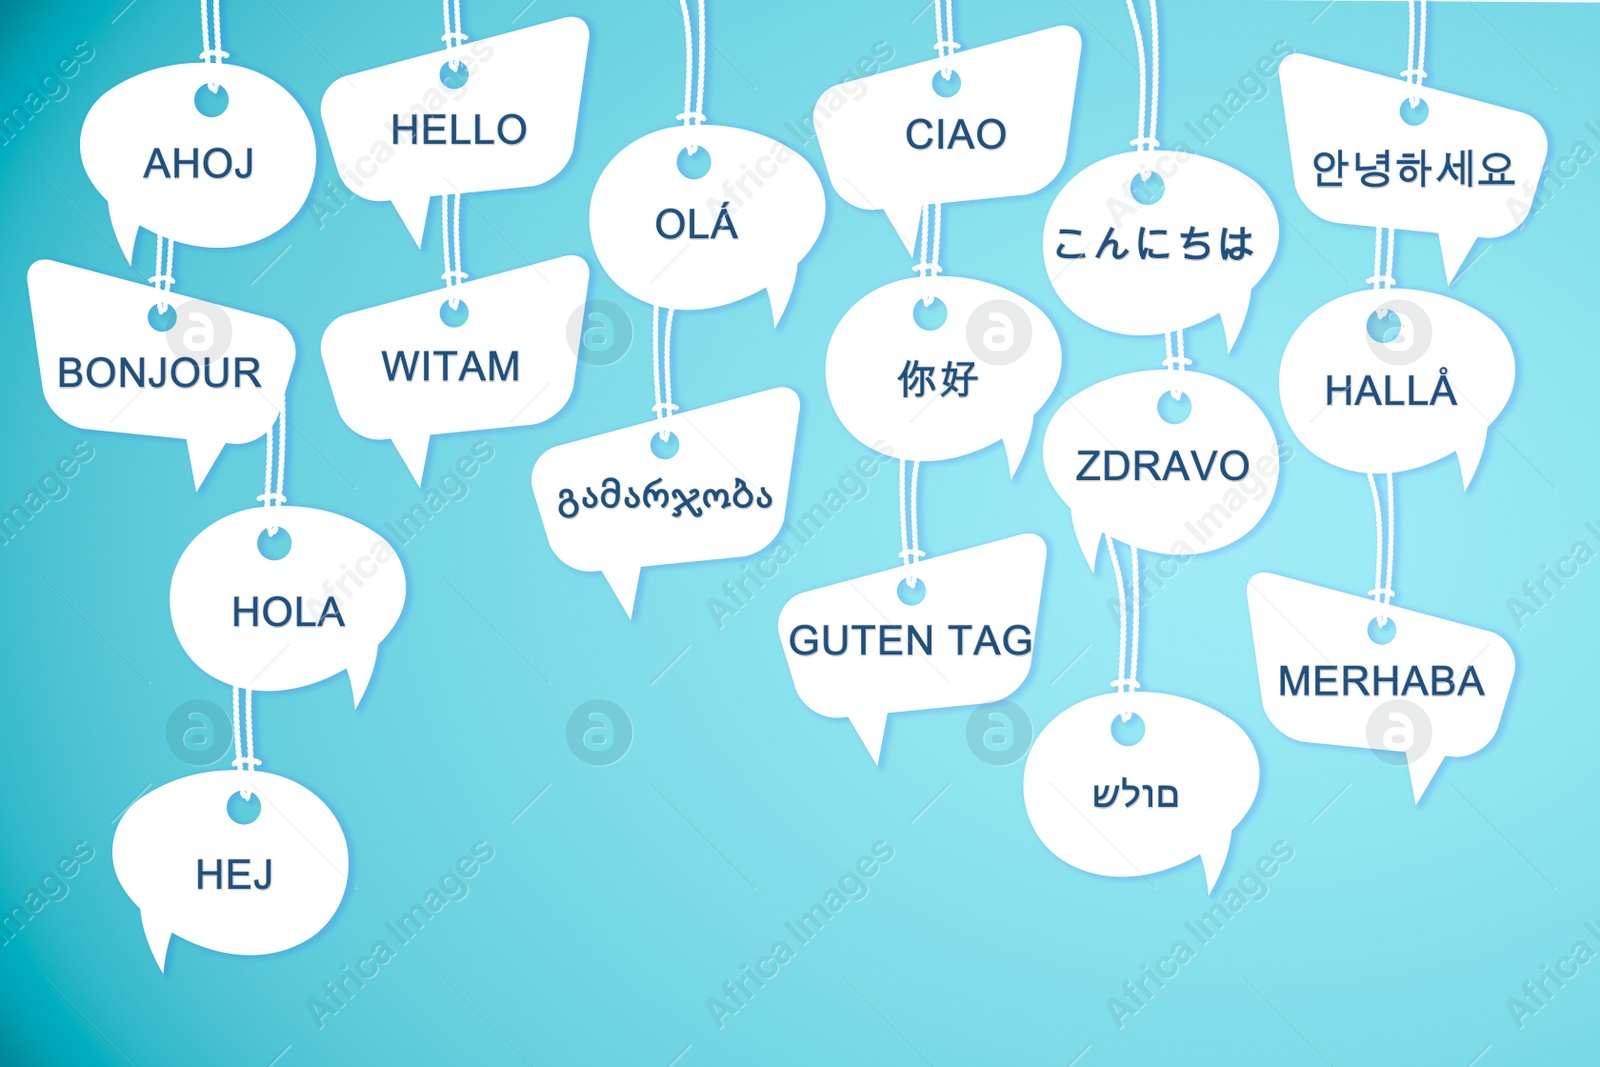 Illustration of Speech bubbles with greeting words in different foreign languages on light blue background